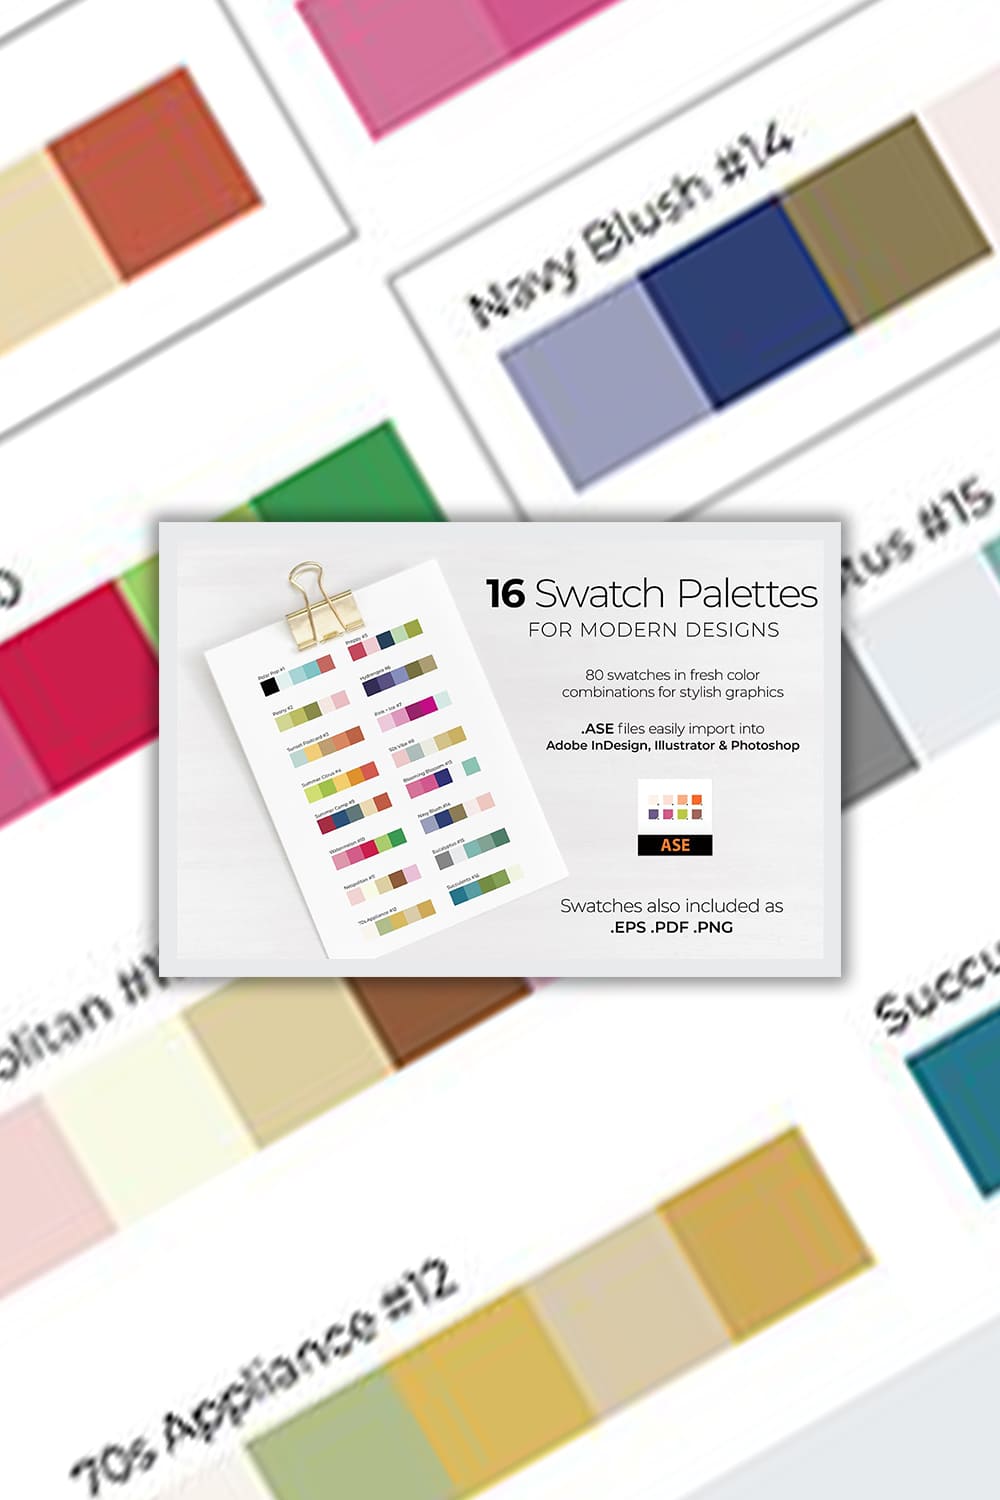 16 Swatch Palettes For Modern Designs - "80 Swatches In Fresh Color Combinations For Stylish Graphics".